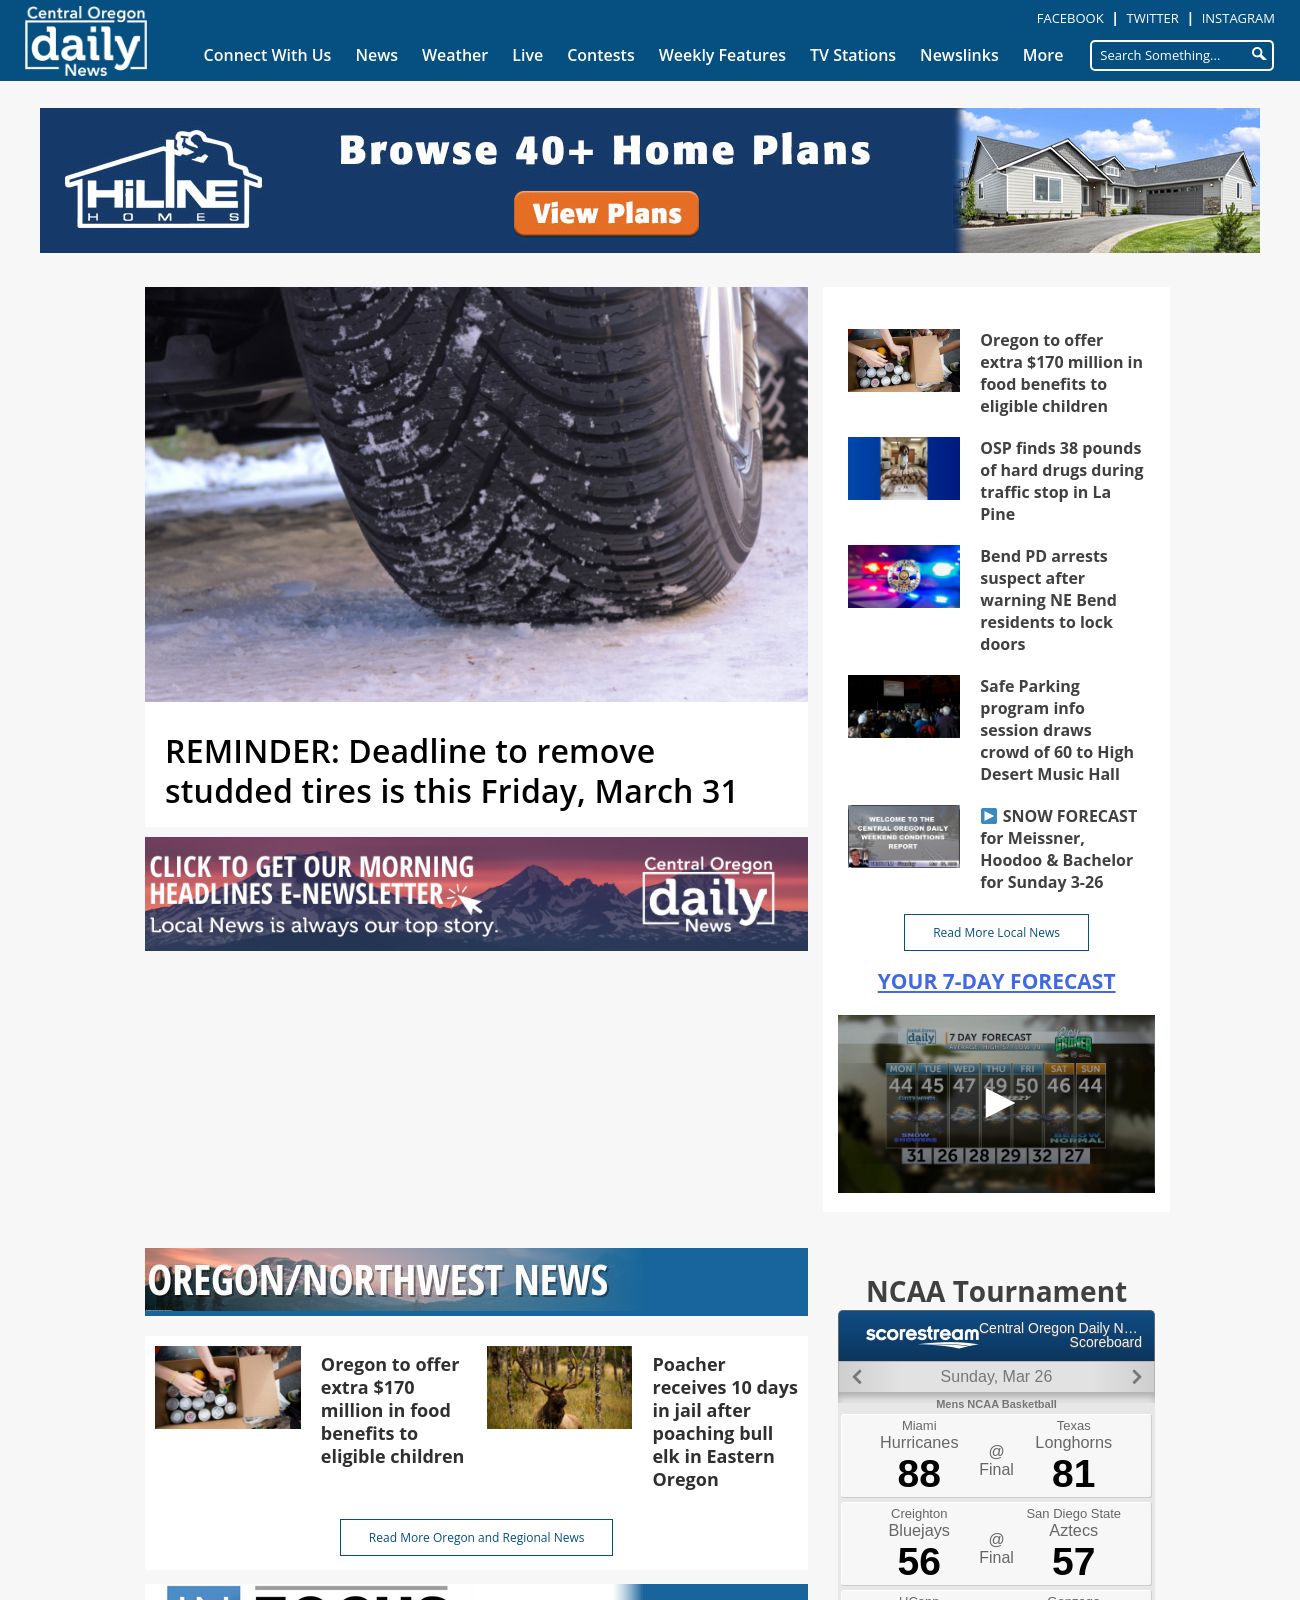 Central Oregon Daily at 2023-03-27 15:31:04-07:00 local time